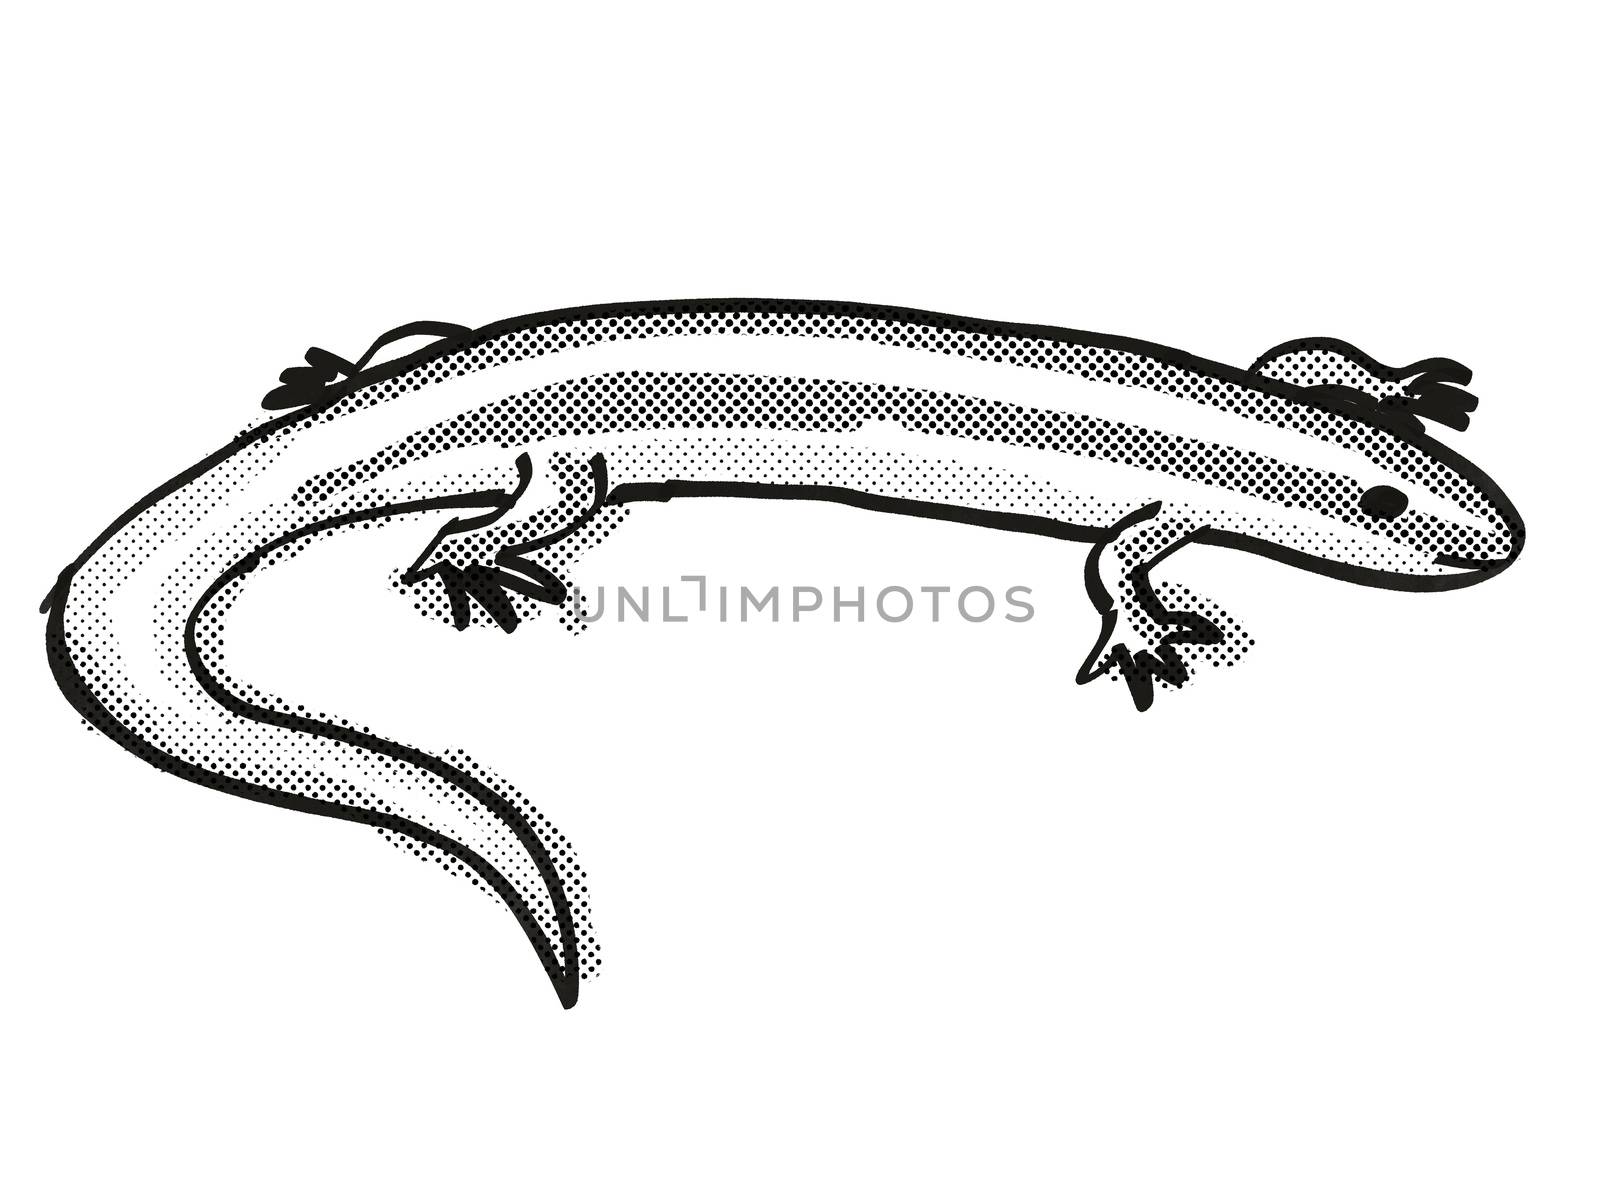 Retro cartoon style drawing of an Alborn Skink , a native New Zealand wildlife on isolated white background done in black and white